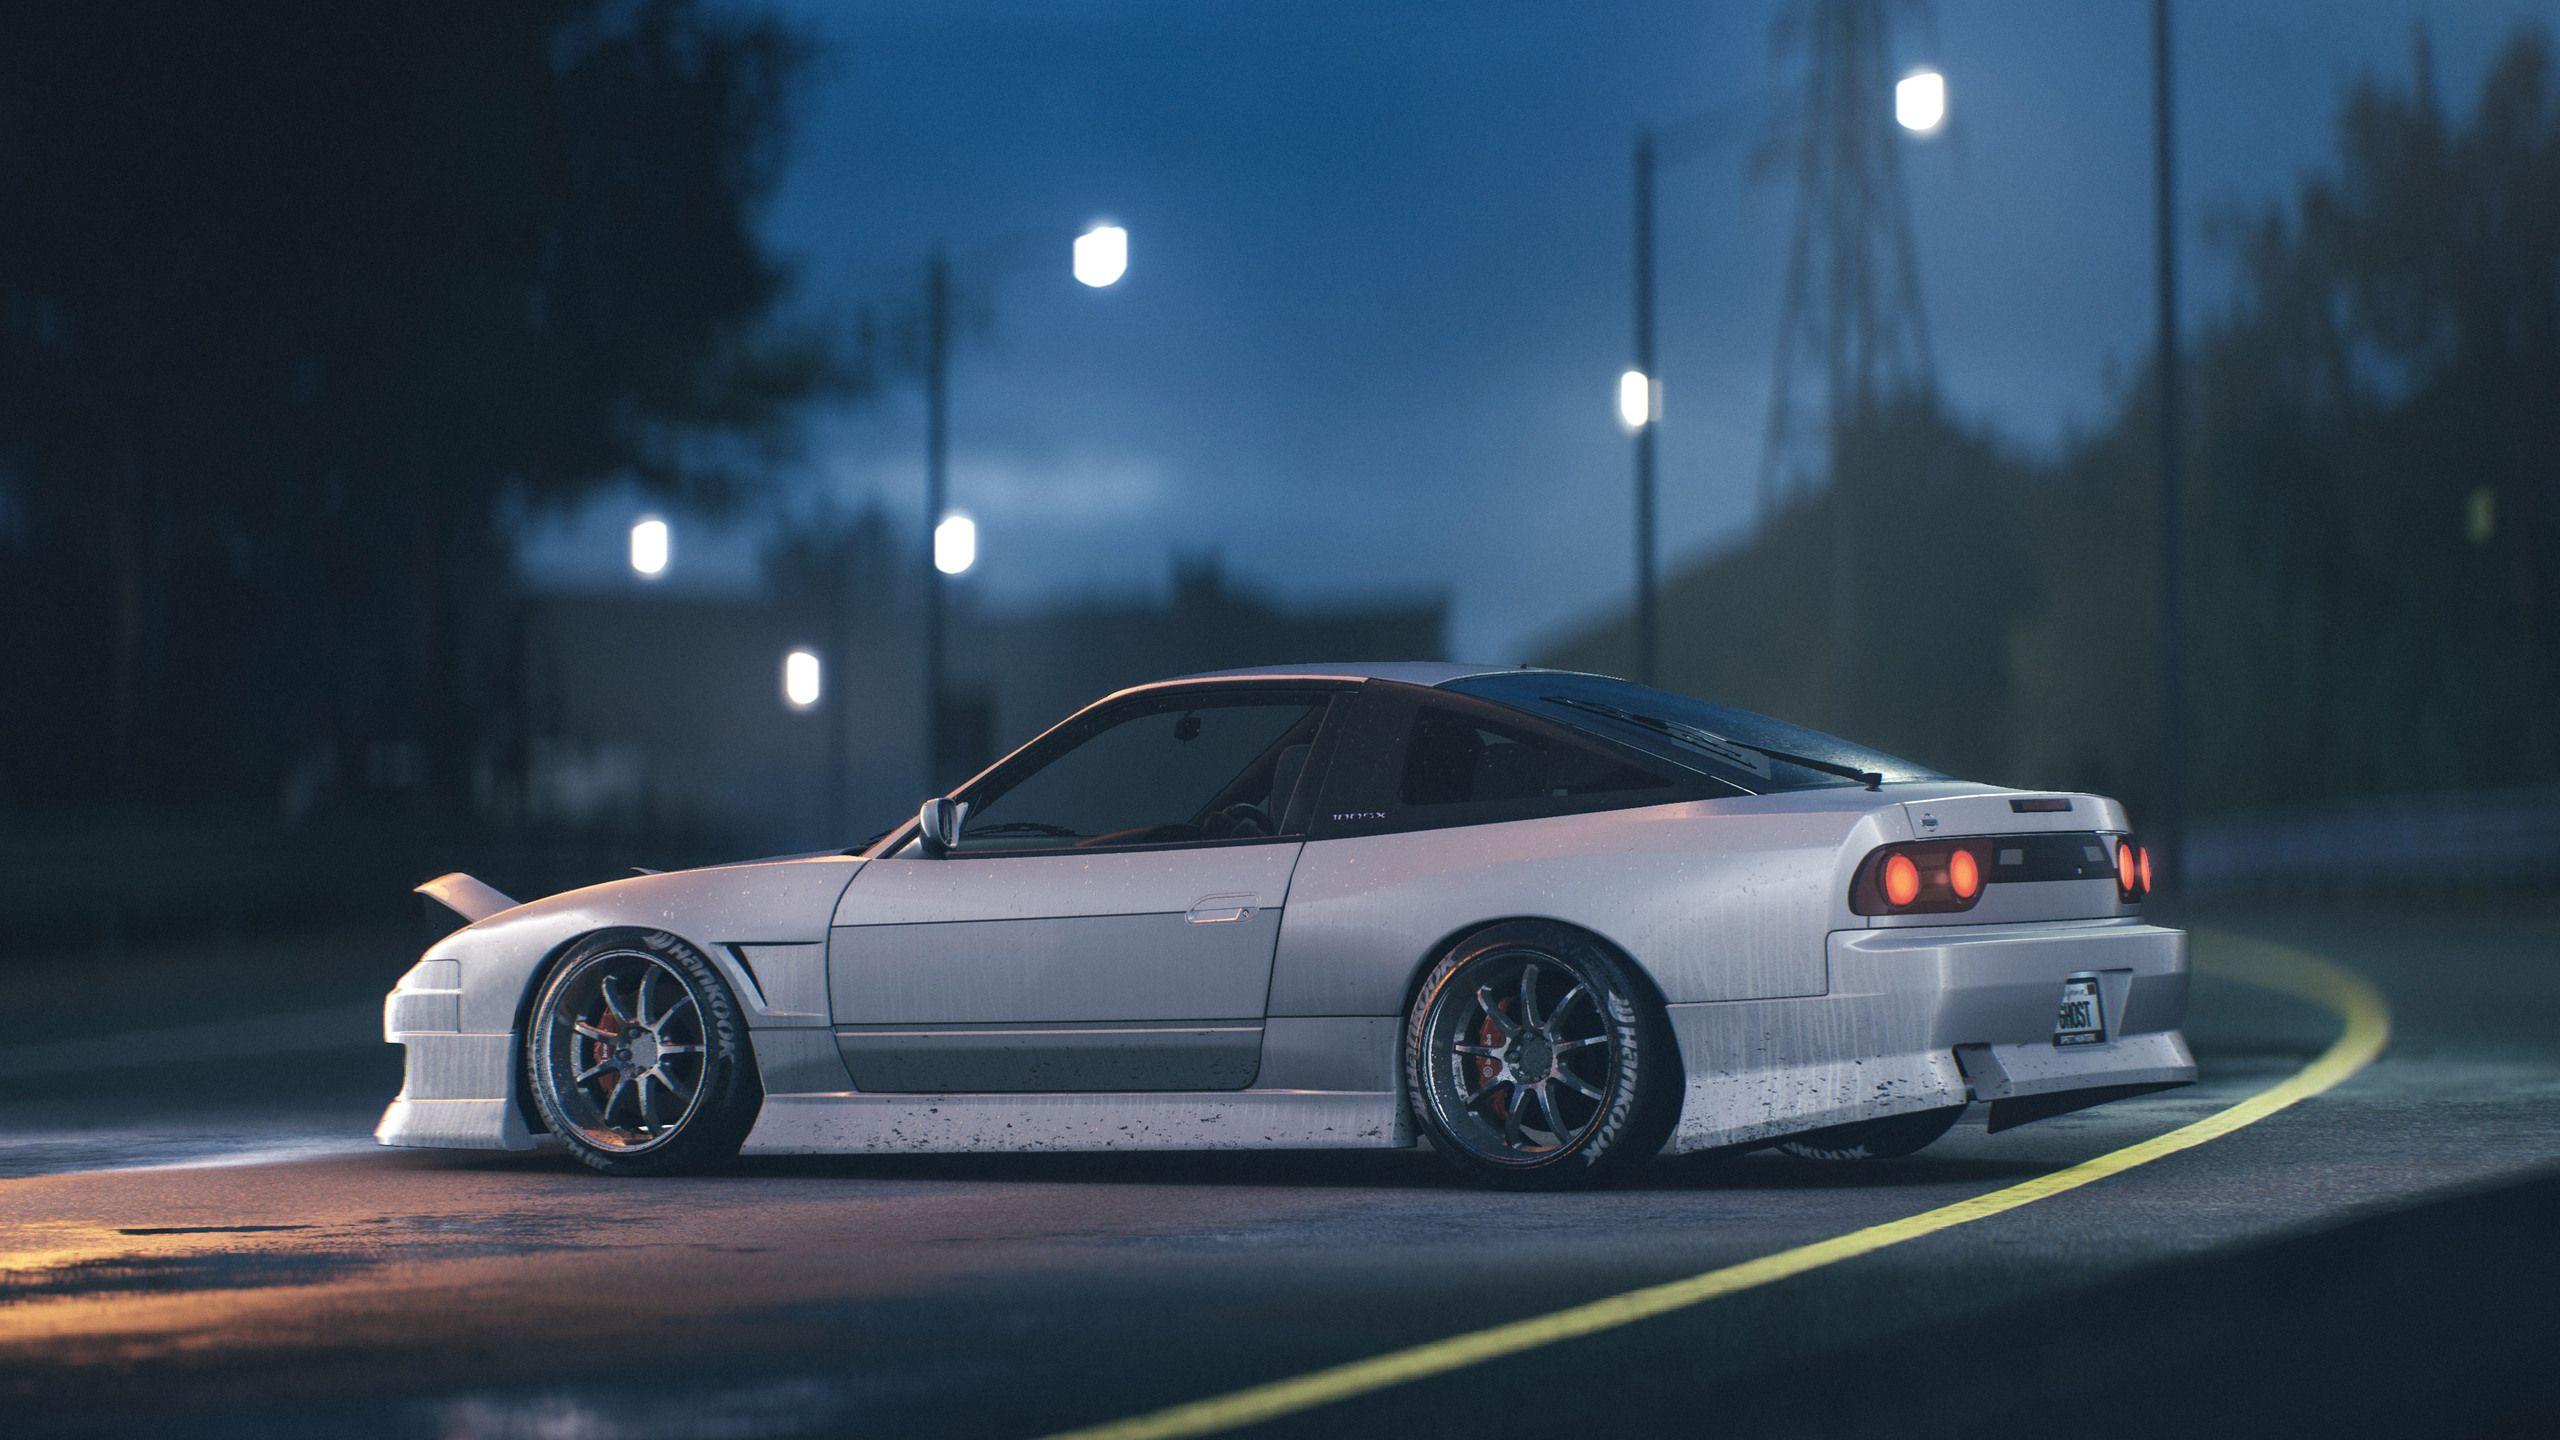 Nissan 180SX Wallpapers - Top Free Nissan 180SX Backgrounds